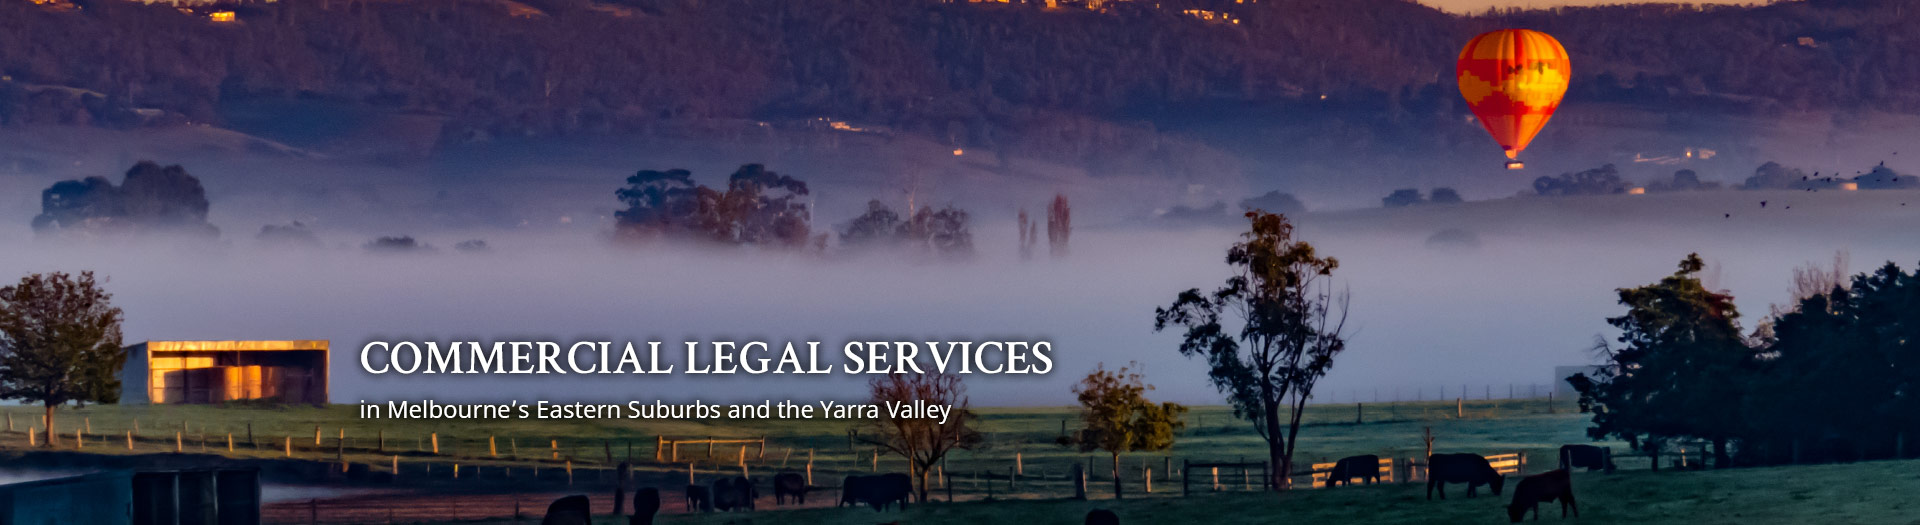 Commercial Legal Services in Melbourne's Eastern Suburbs and the Yarra Valley